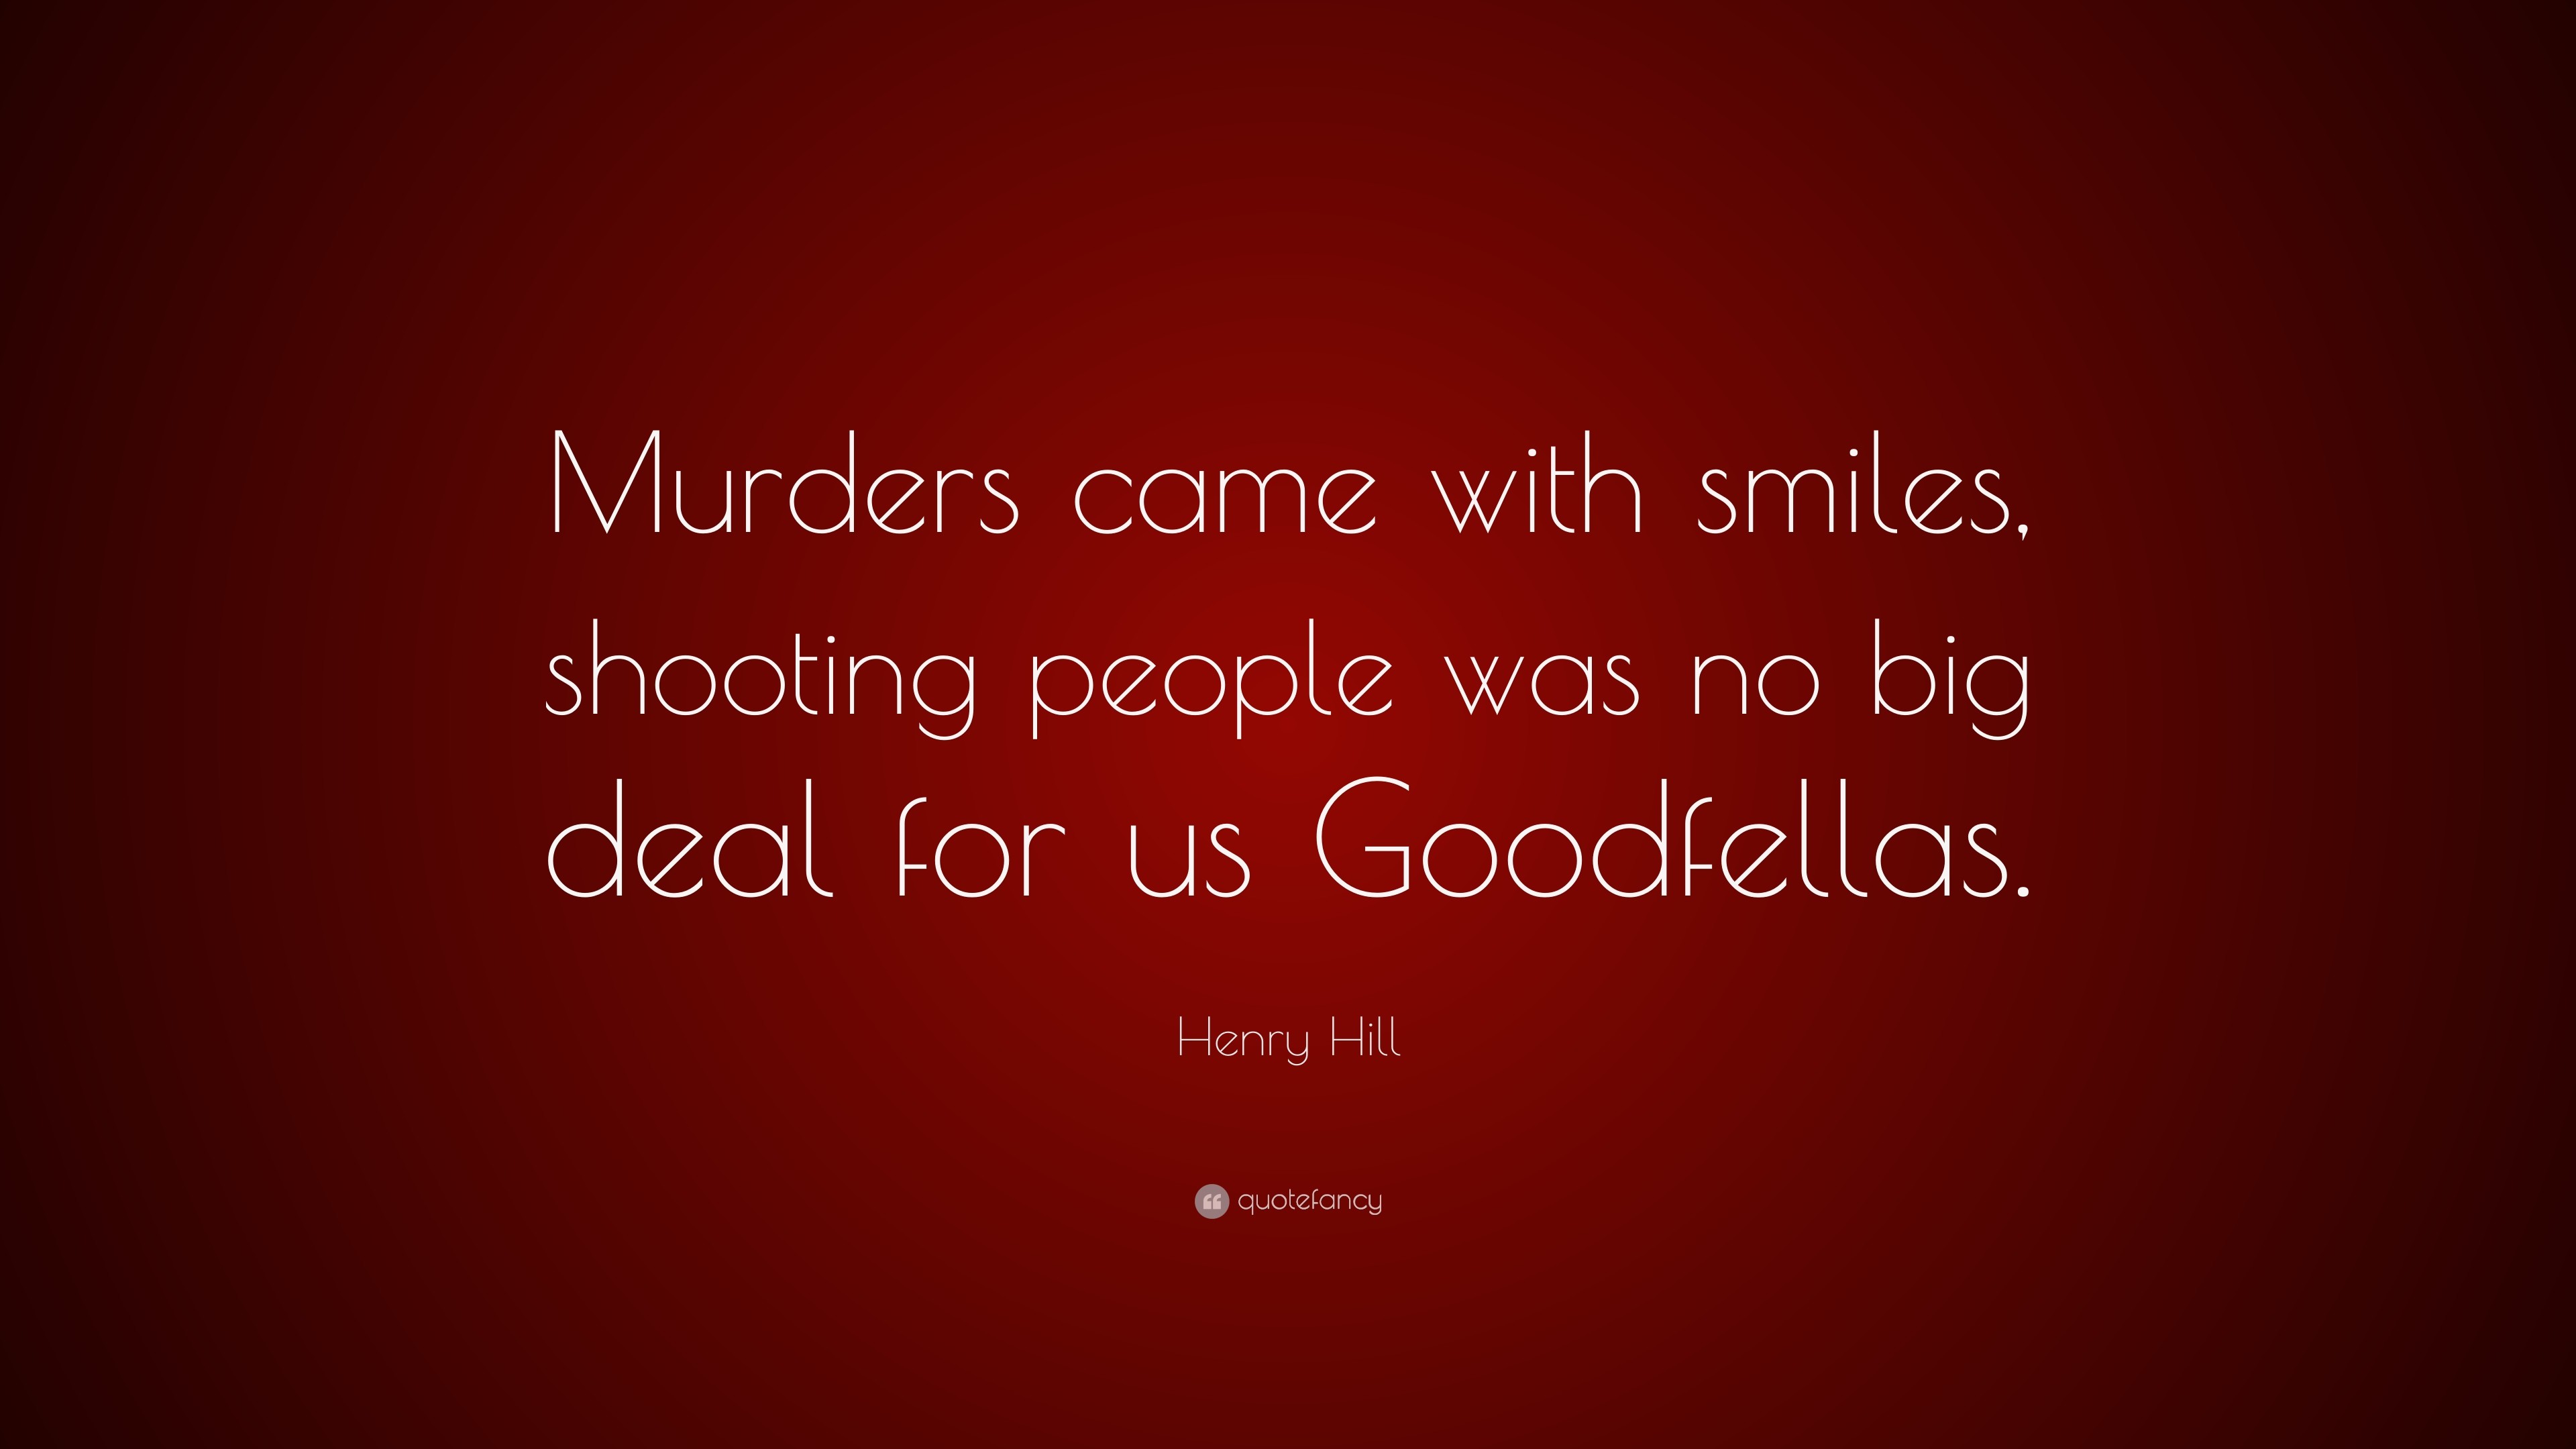 3840x2160 Henry Hill Quote: “Murders came with smiles, shooting people was no big deal